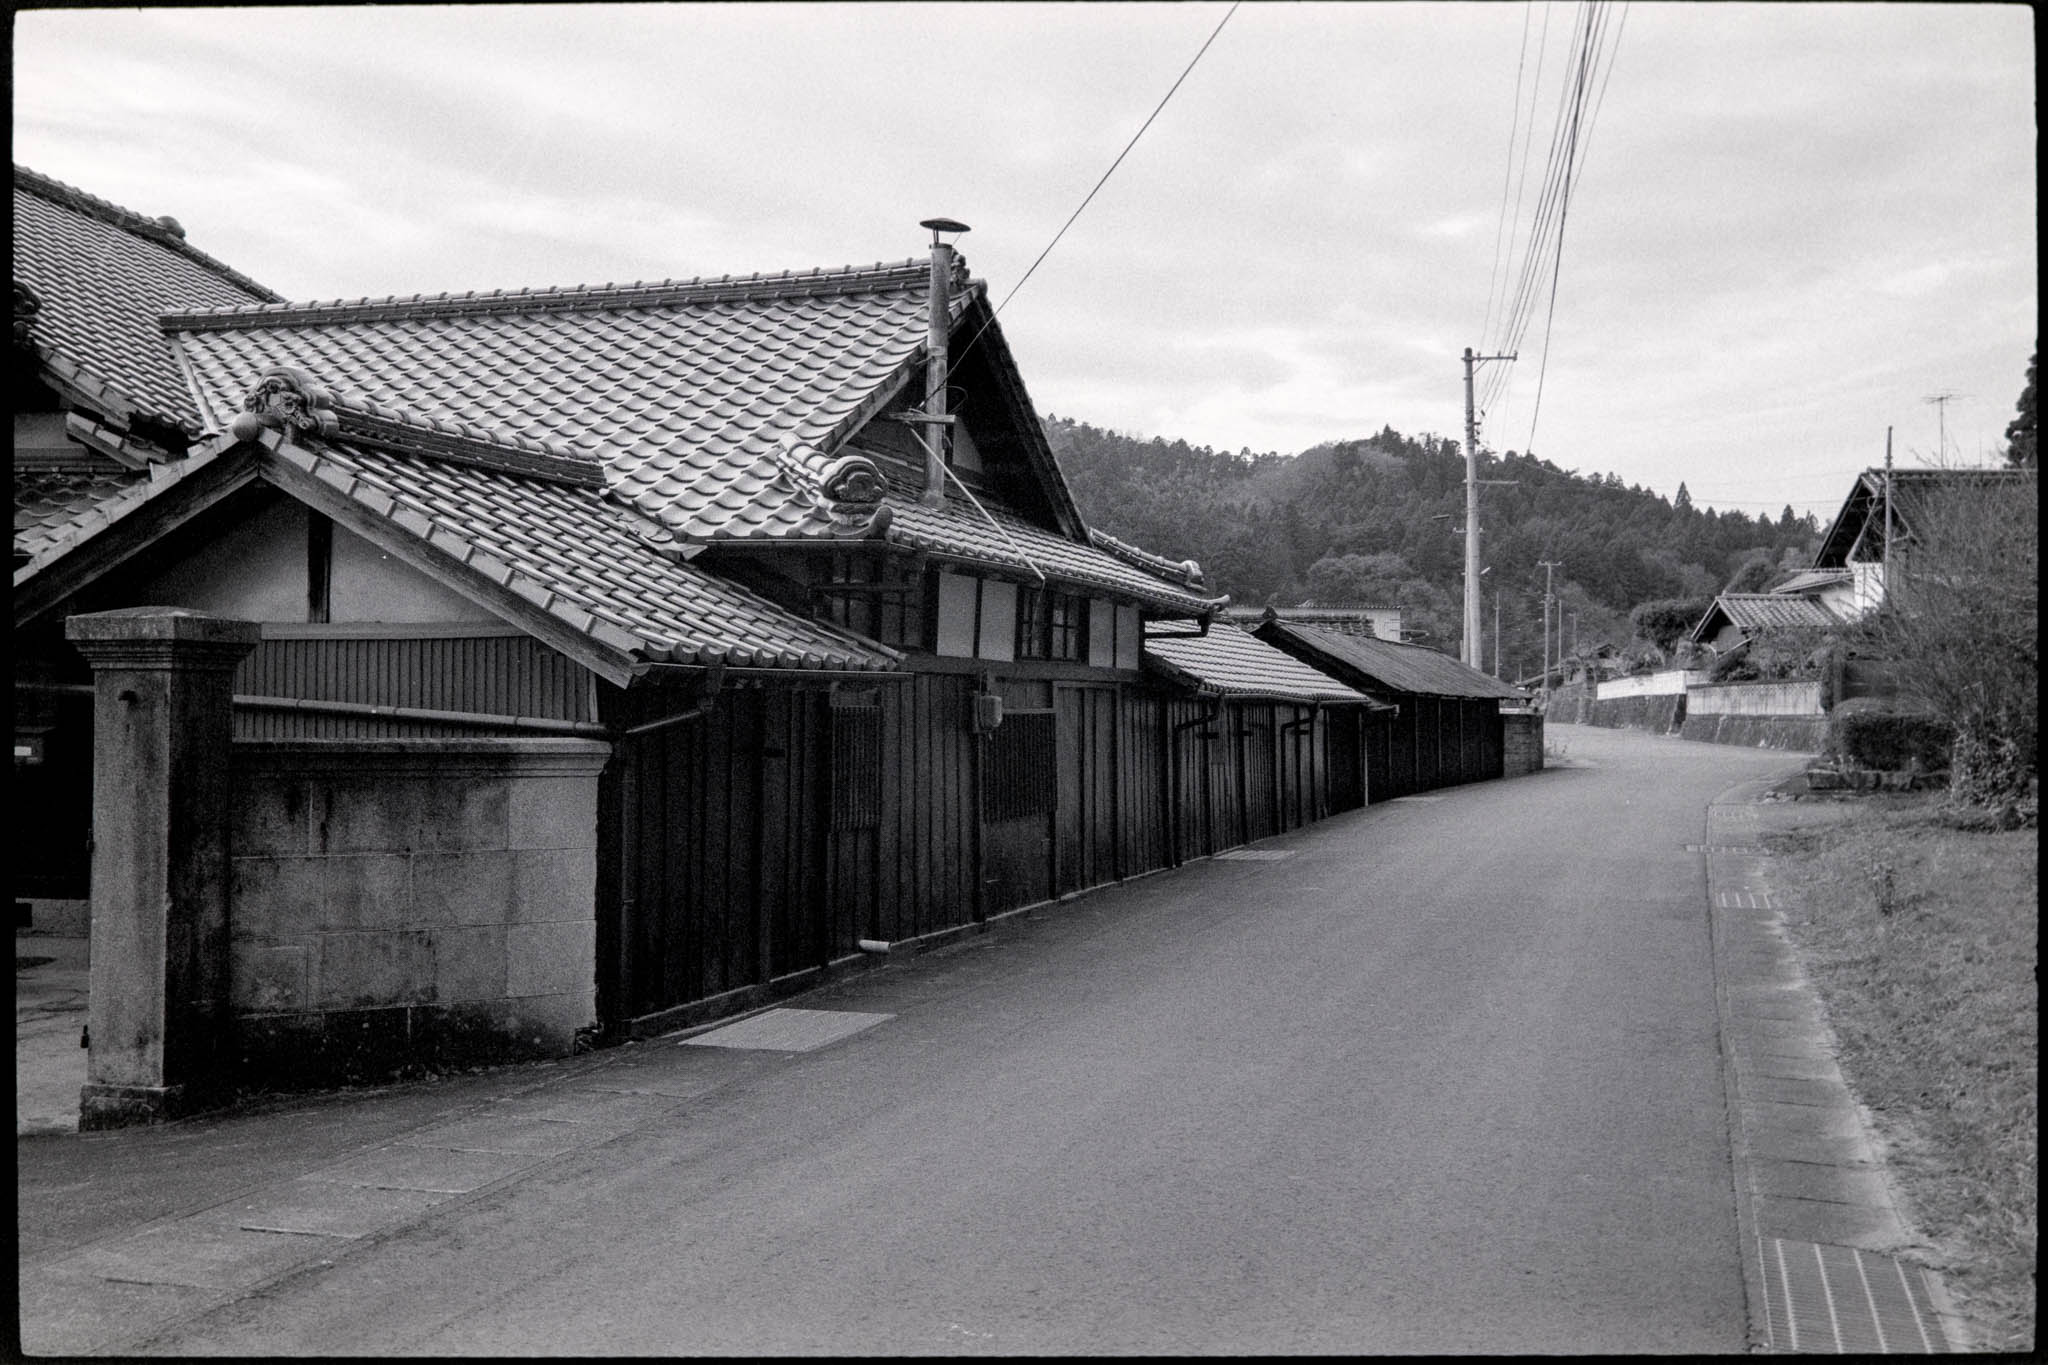 Black and white view of an empty, historic street lined with traditional houses.